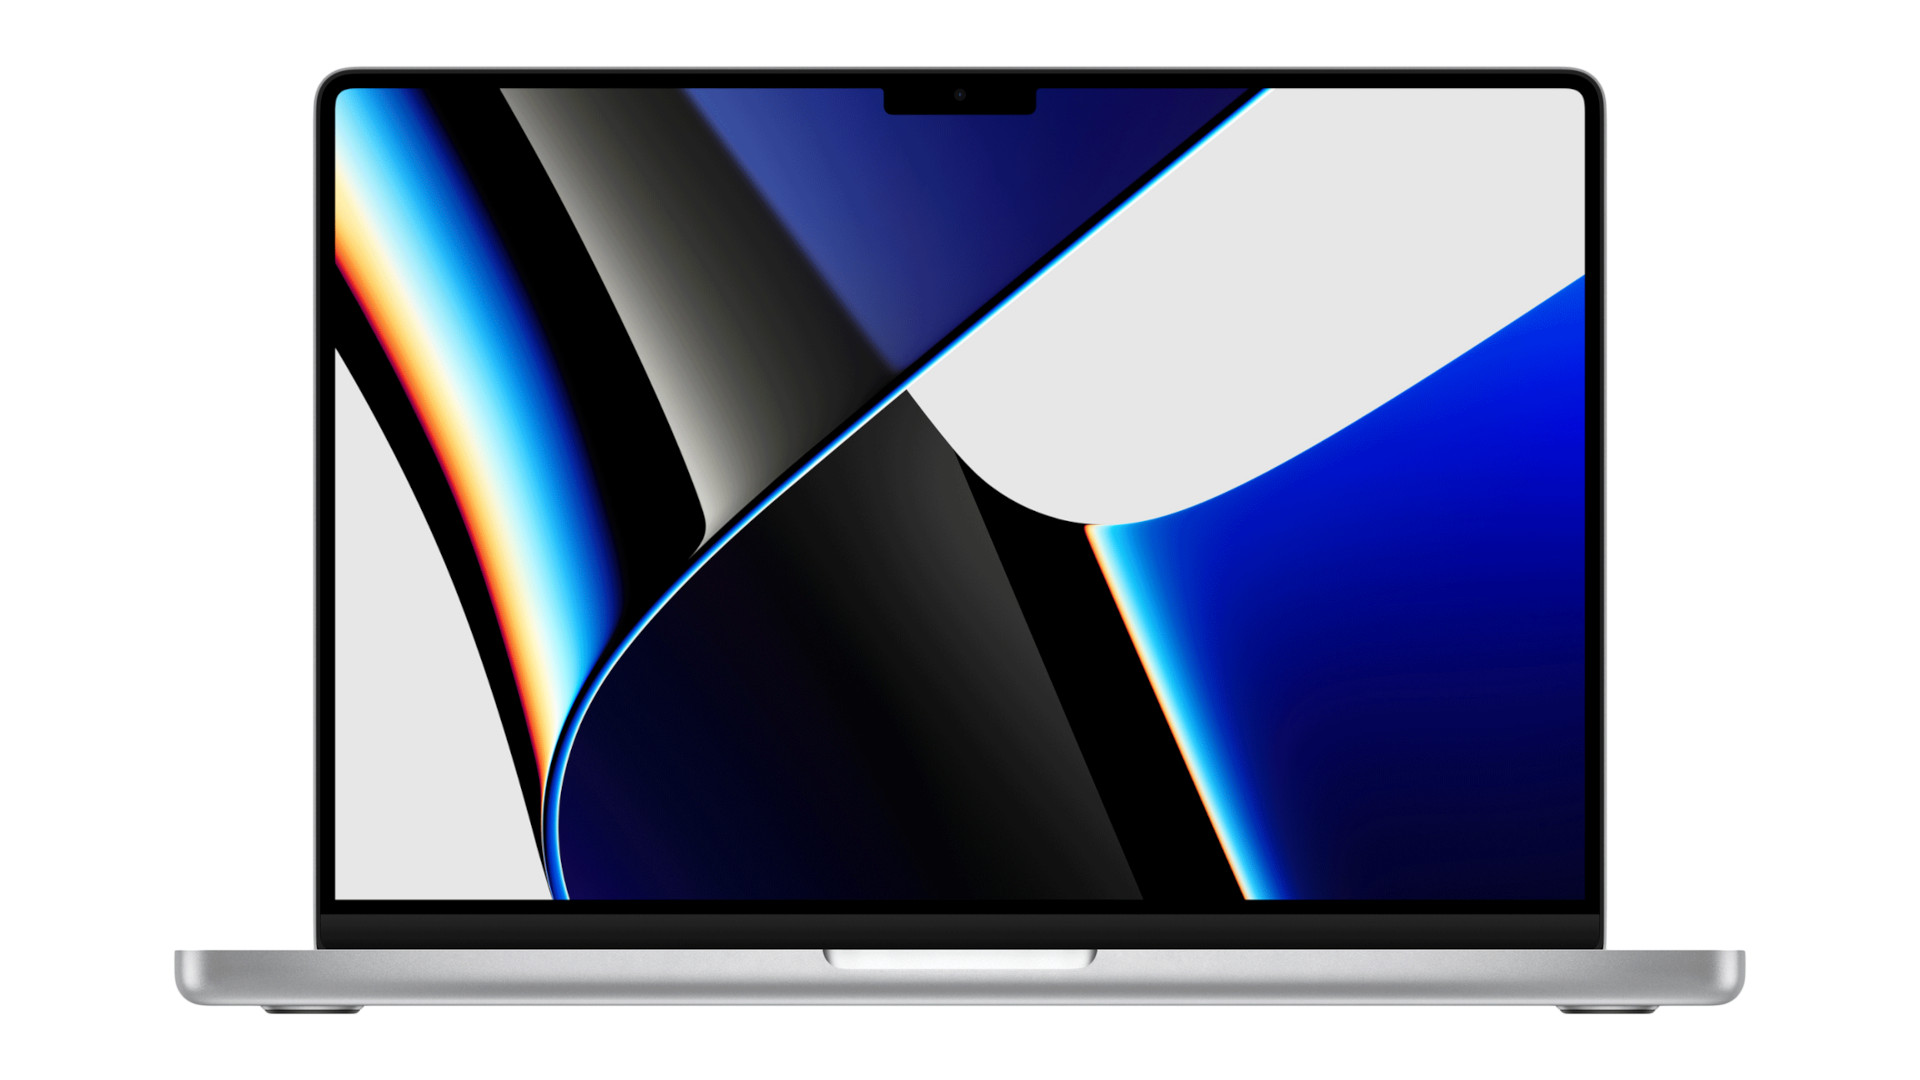 14-inch MacBook Pro (2021) on a white background, showing an abstract blue desktop background